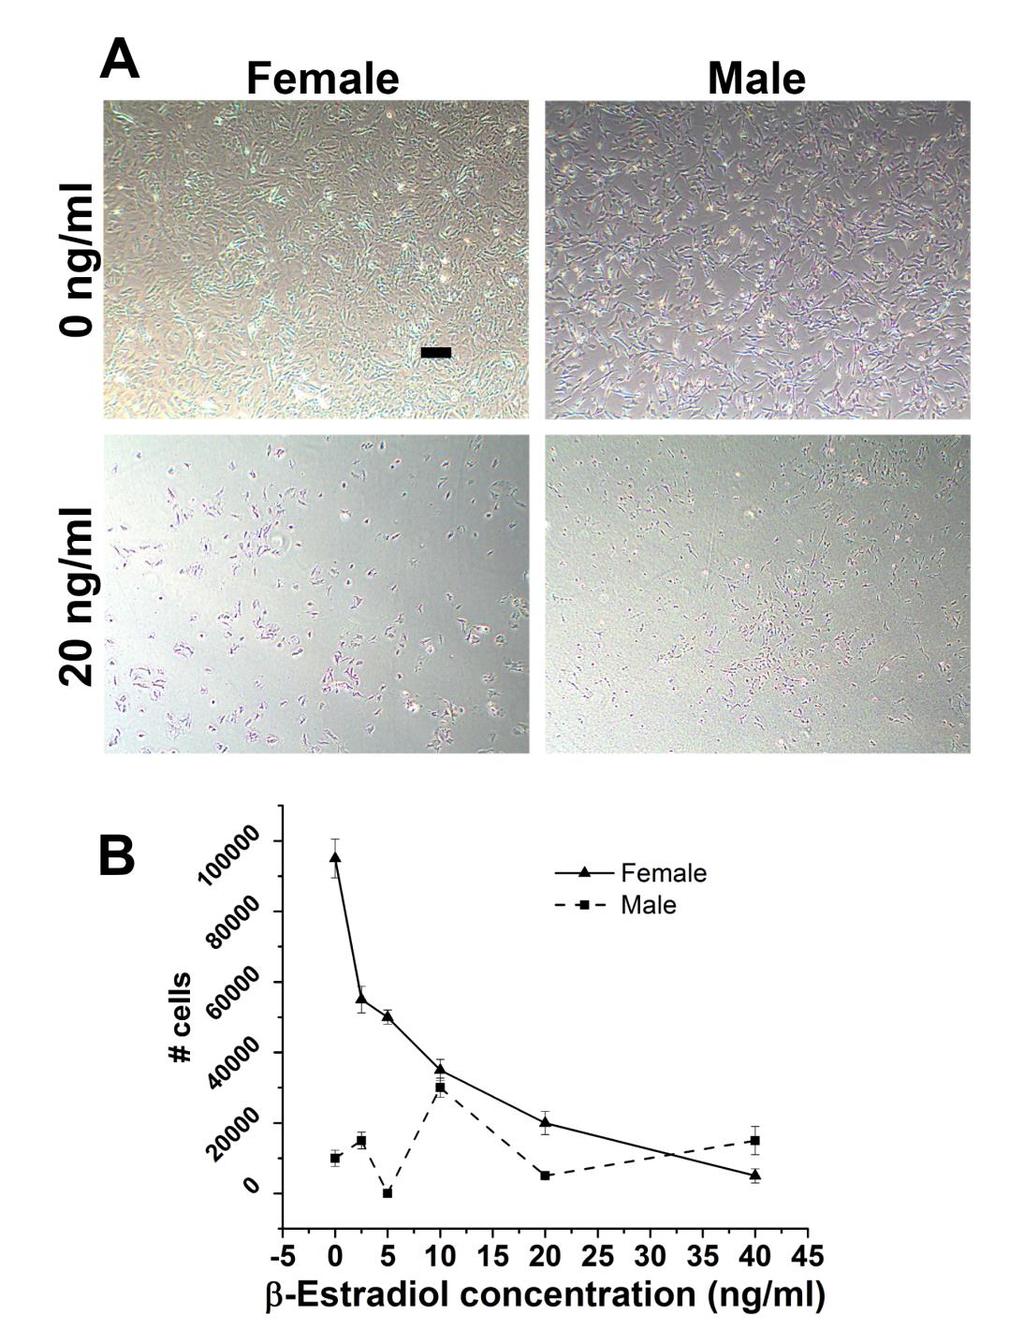 Figure 4.6 (A) Images of male and female VICs treated with 0 and 20 ng/ml β-estradiol in regular culture media for 2 days. Scale bar is 250μm.